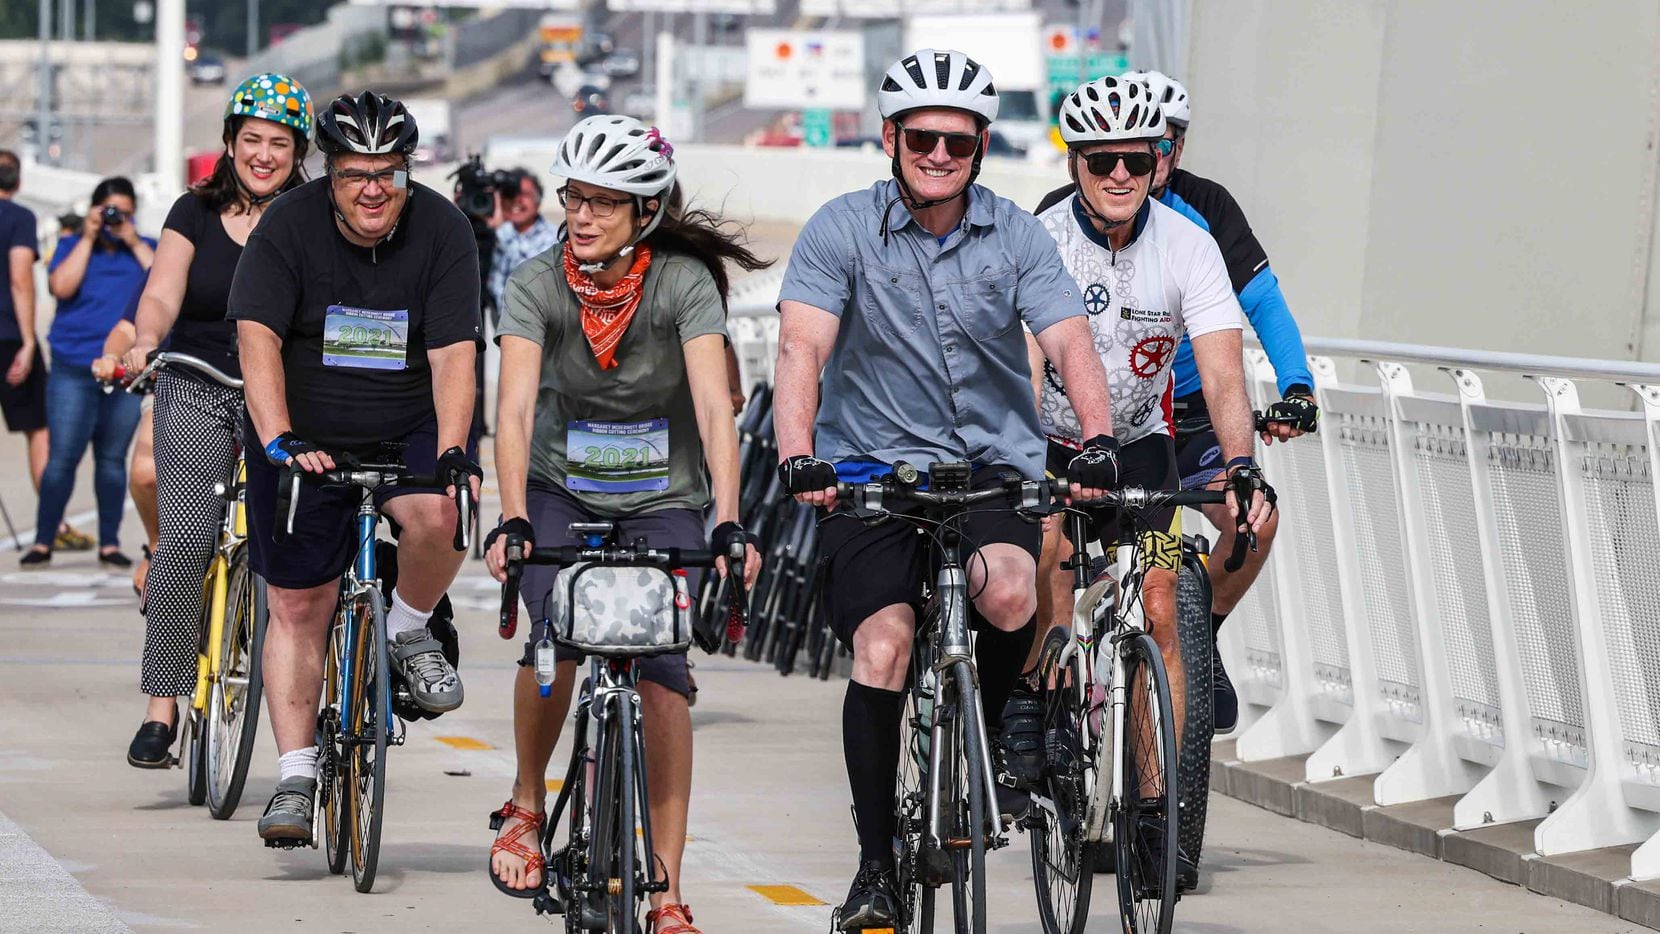 Dallas County Judge Clay Jenkins, along with a group of cyclists, ride their bikes during the opening of the eastbound and westbound pedestrian and bicycle bridges on the Margaret McDermott Bridge in Dallas on Thursday, June 10, 2021.